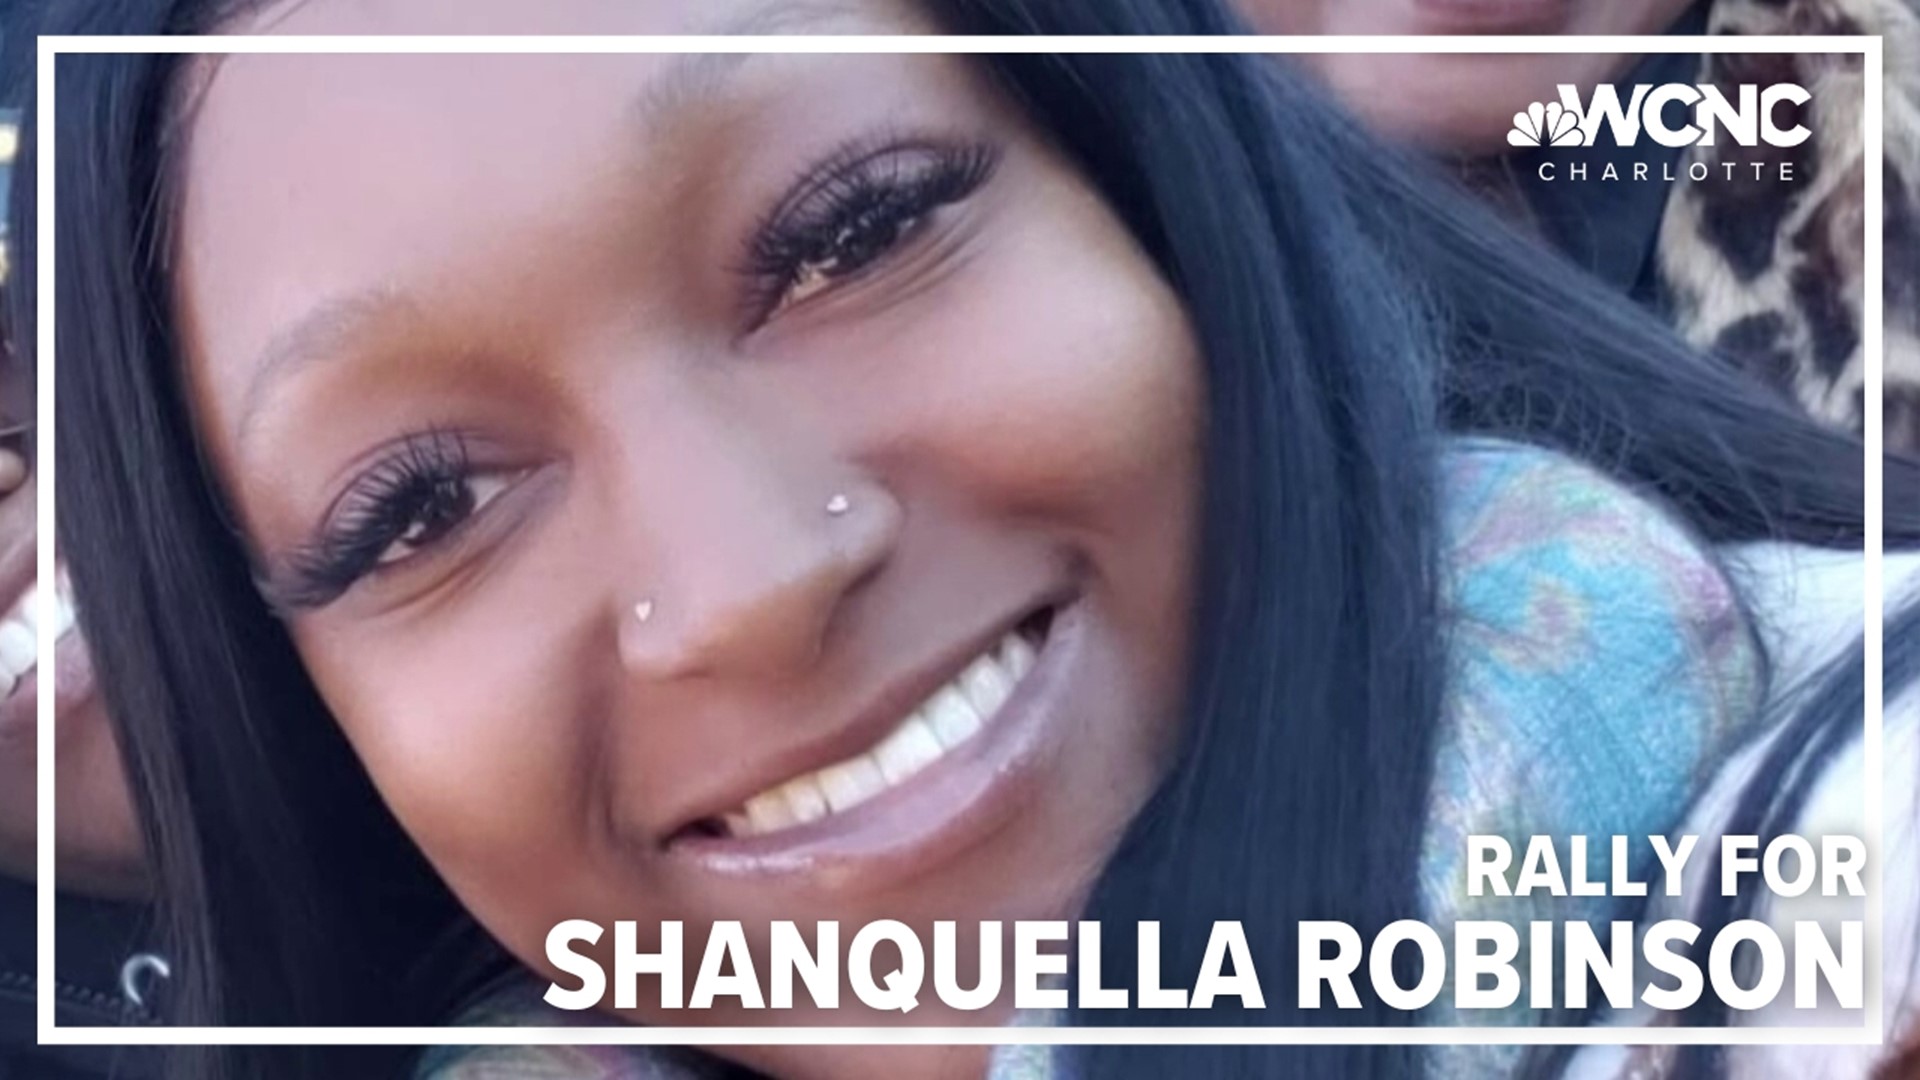 A rally will be held Saturday, Dec. 10 at Little Rock AME Zion Church in Uptown Charlotte to call for justice in the killing of Shanquella Robinson.